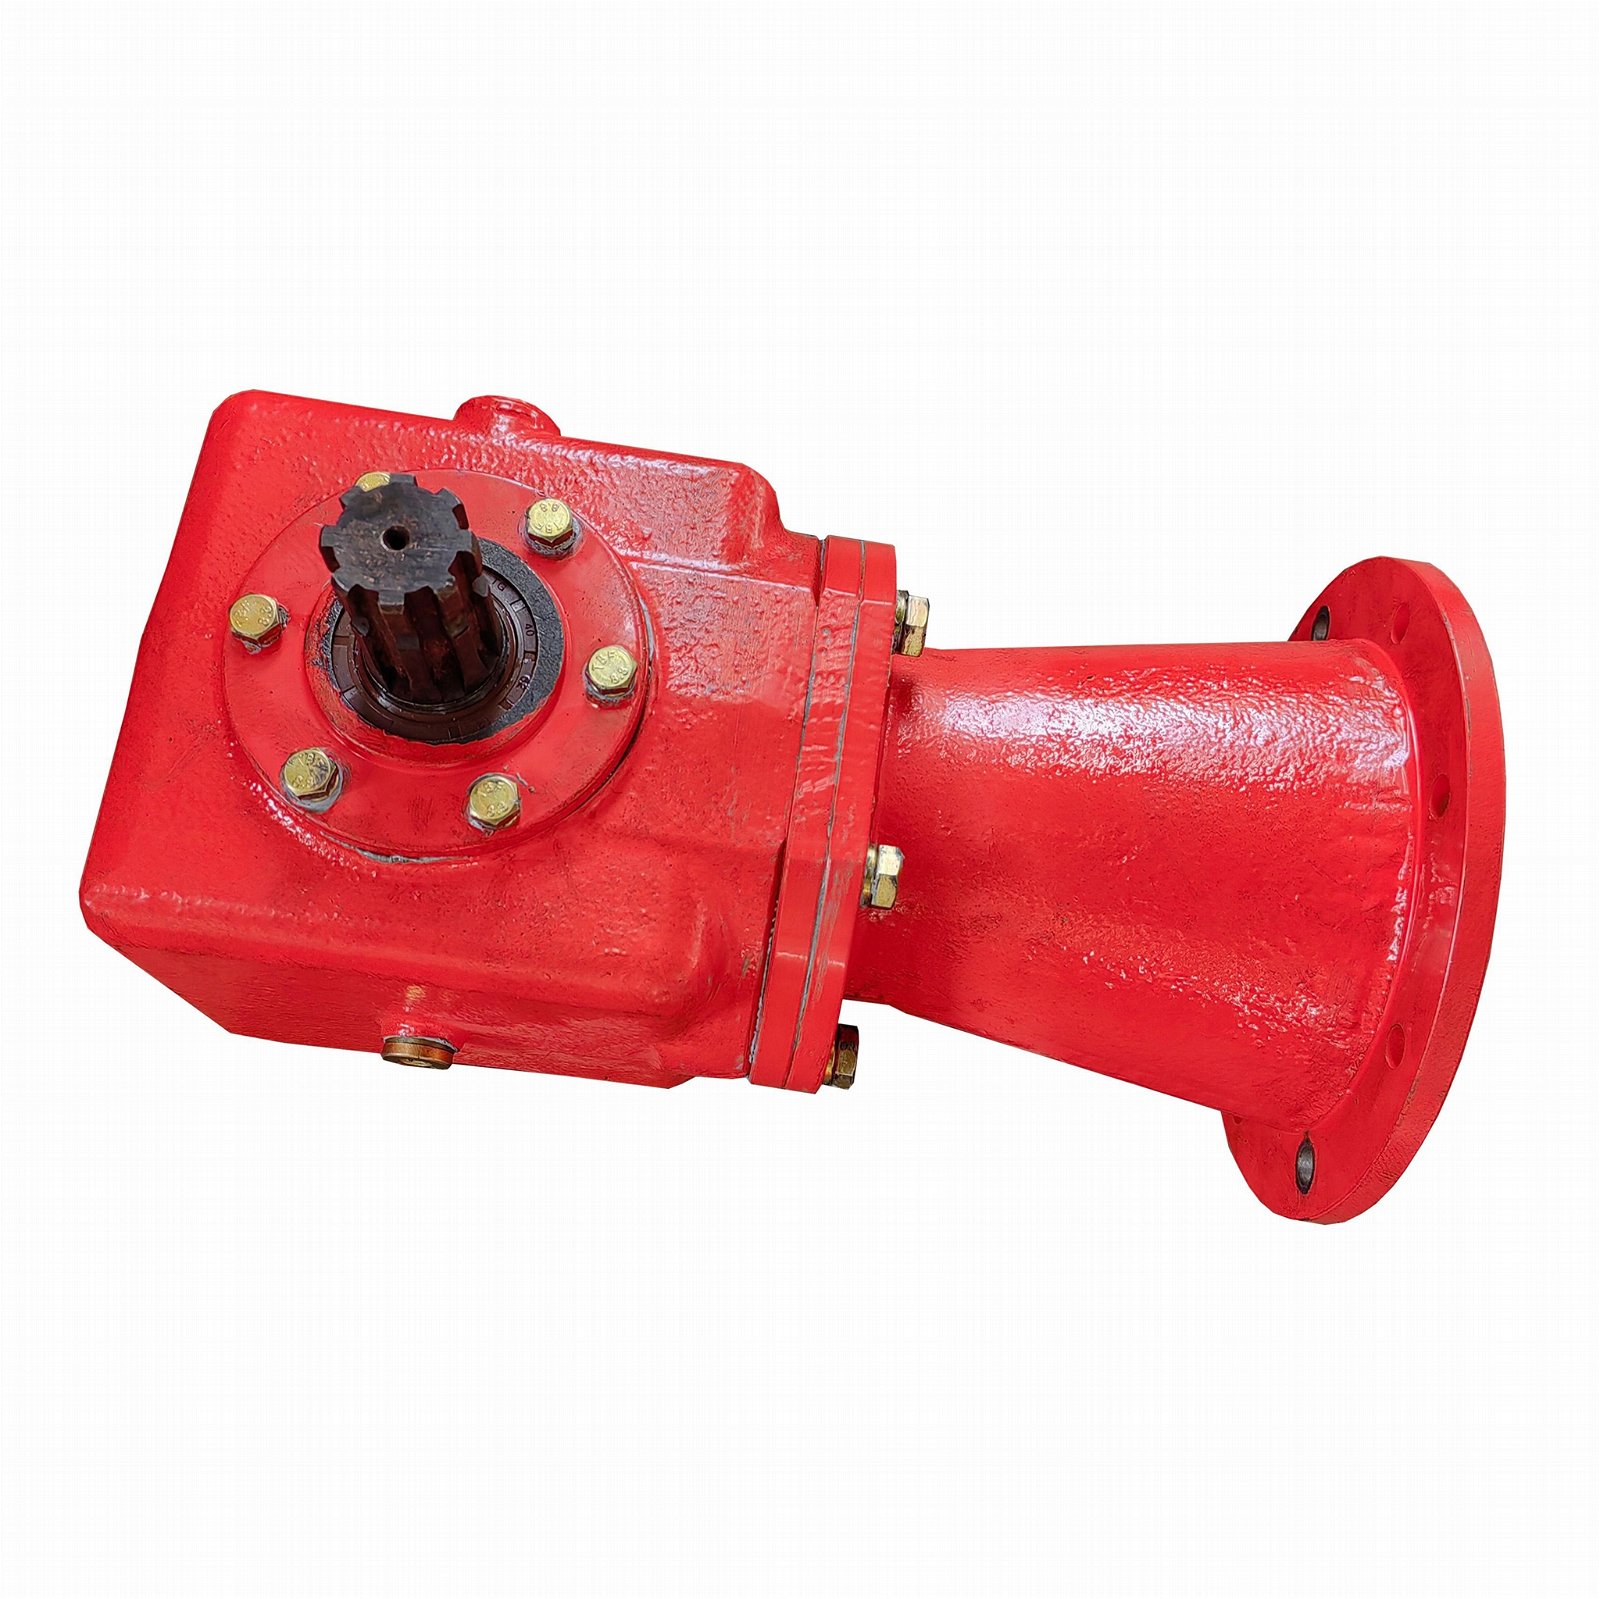 Right Angle Gearbox for Levee Plastering Machine 2